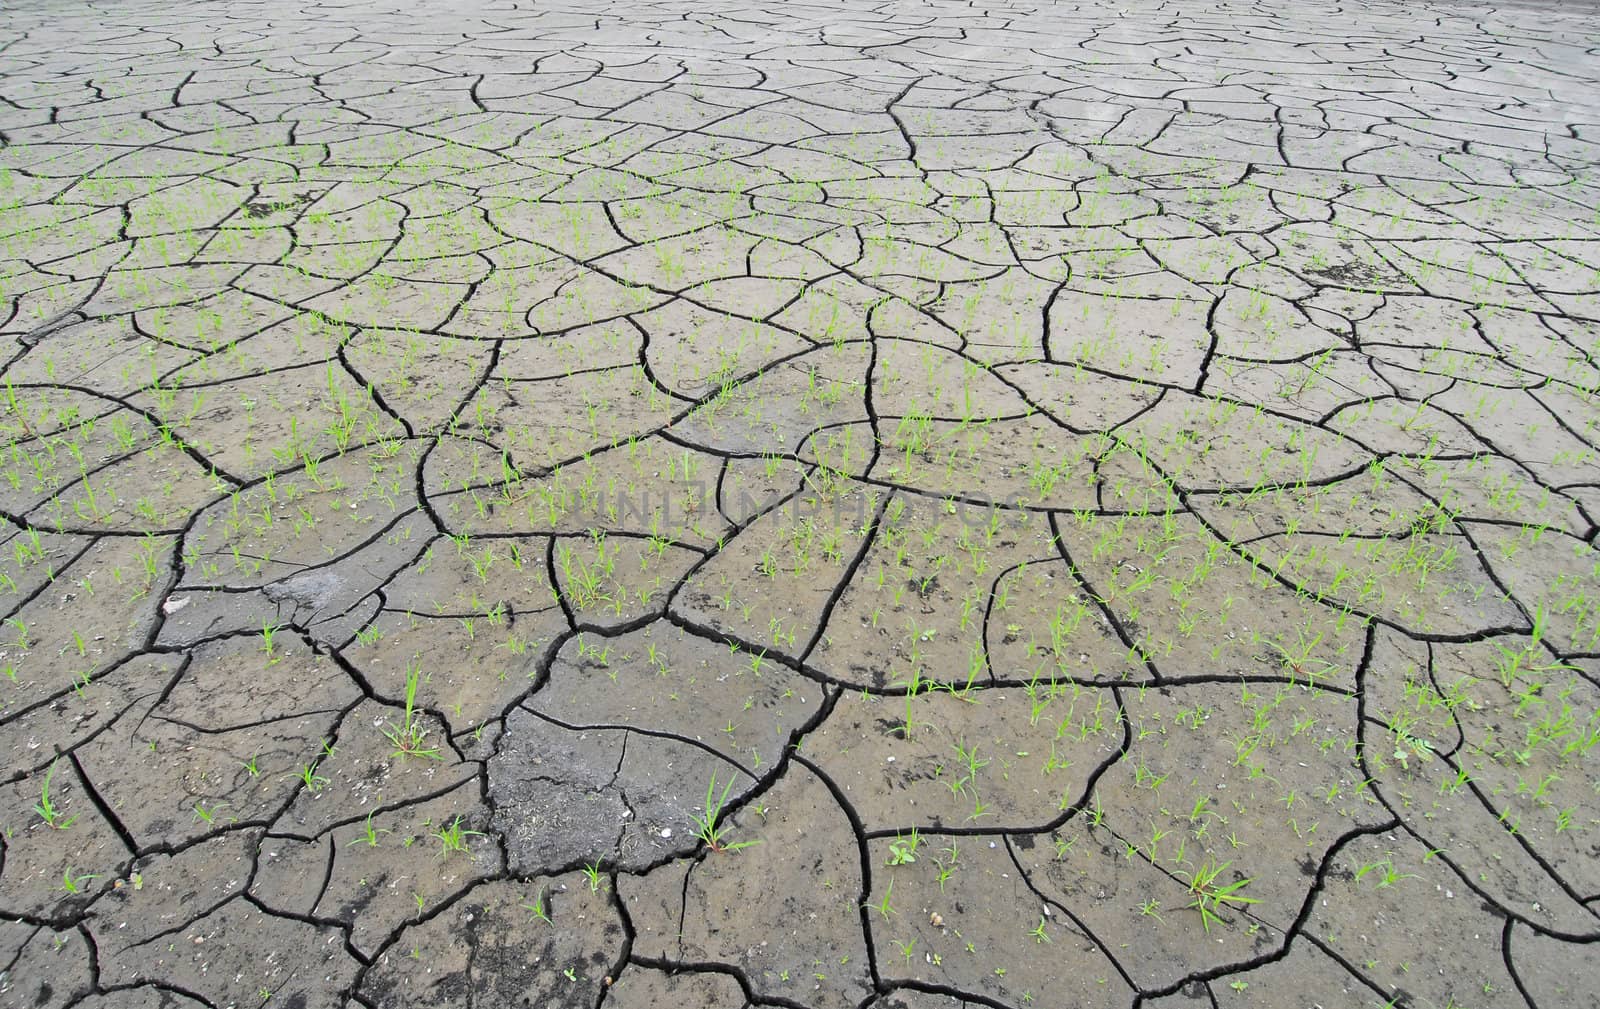 Dried up lake bed with the start of new green vegetation